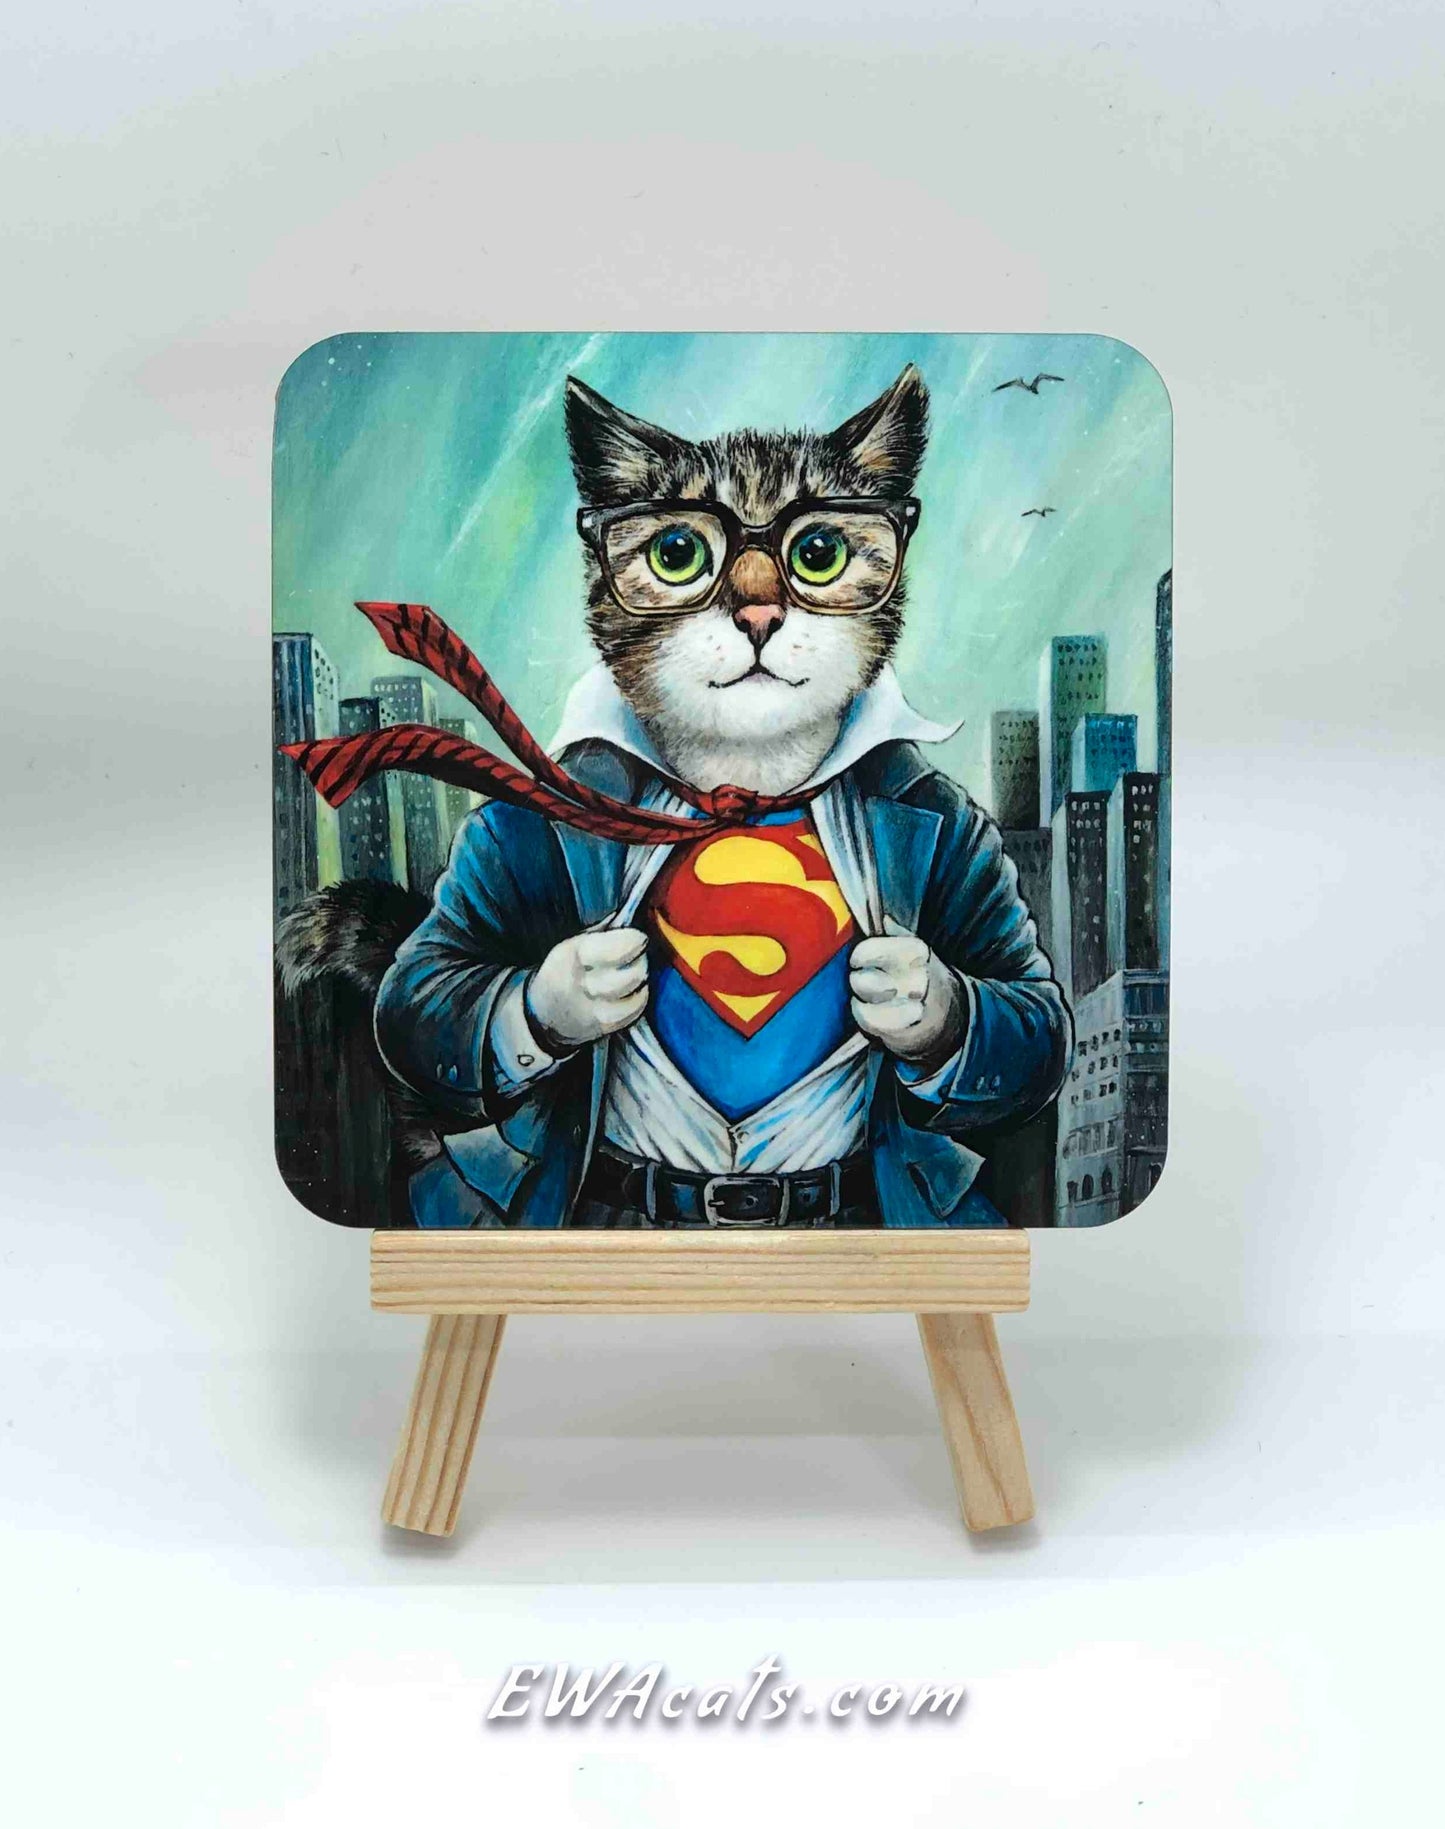 Coaster "The Cat of Steel"